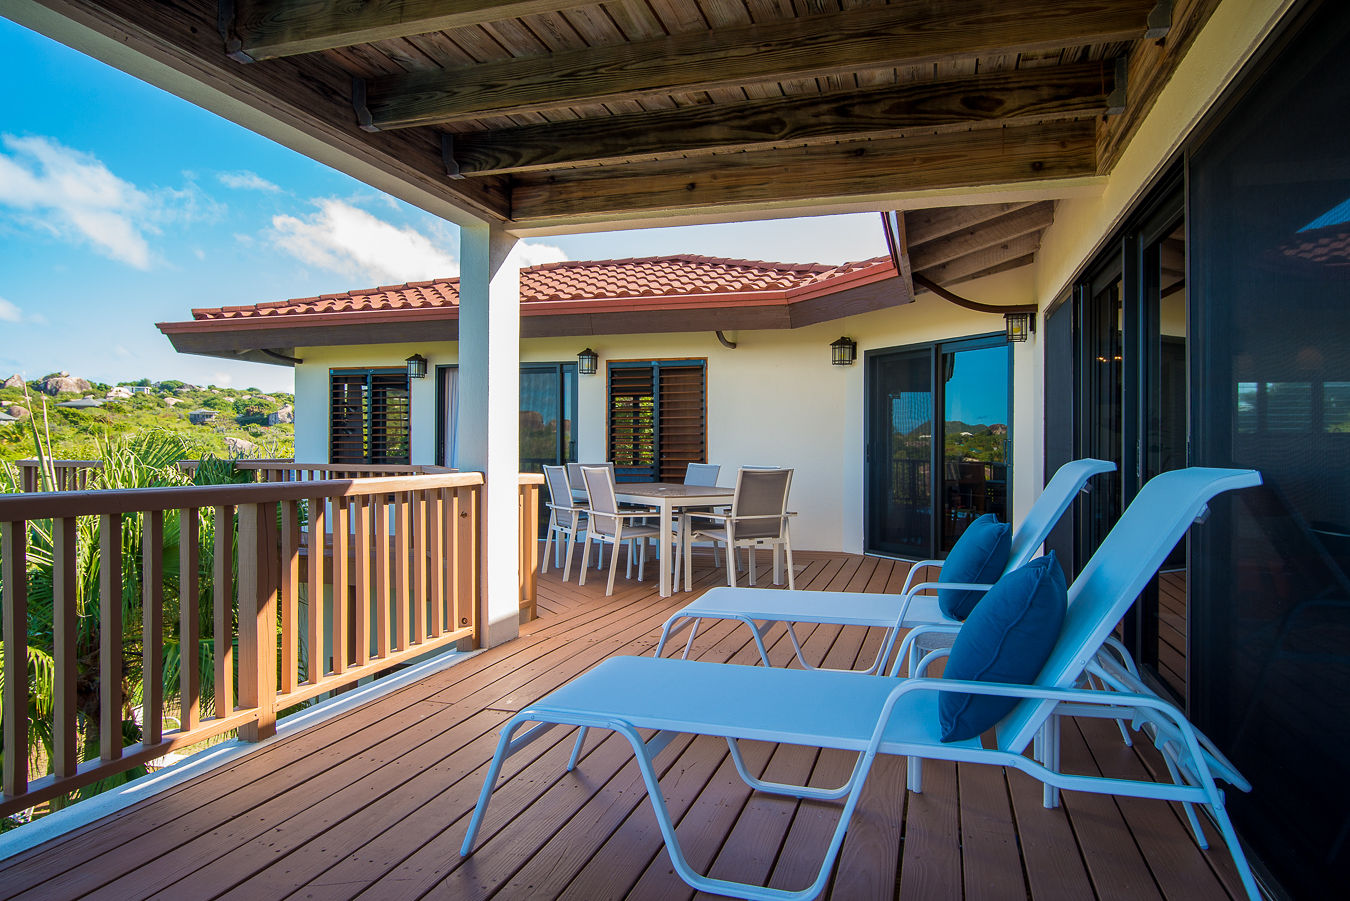 Wrap-around deck with lounging and dining areas on the upper-level of Amani Villa with the island in the background.